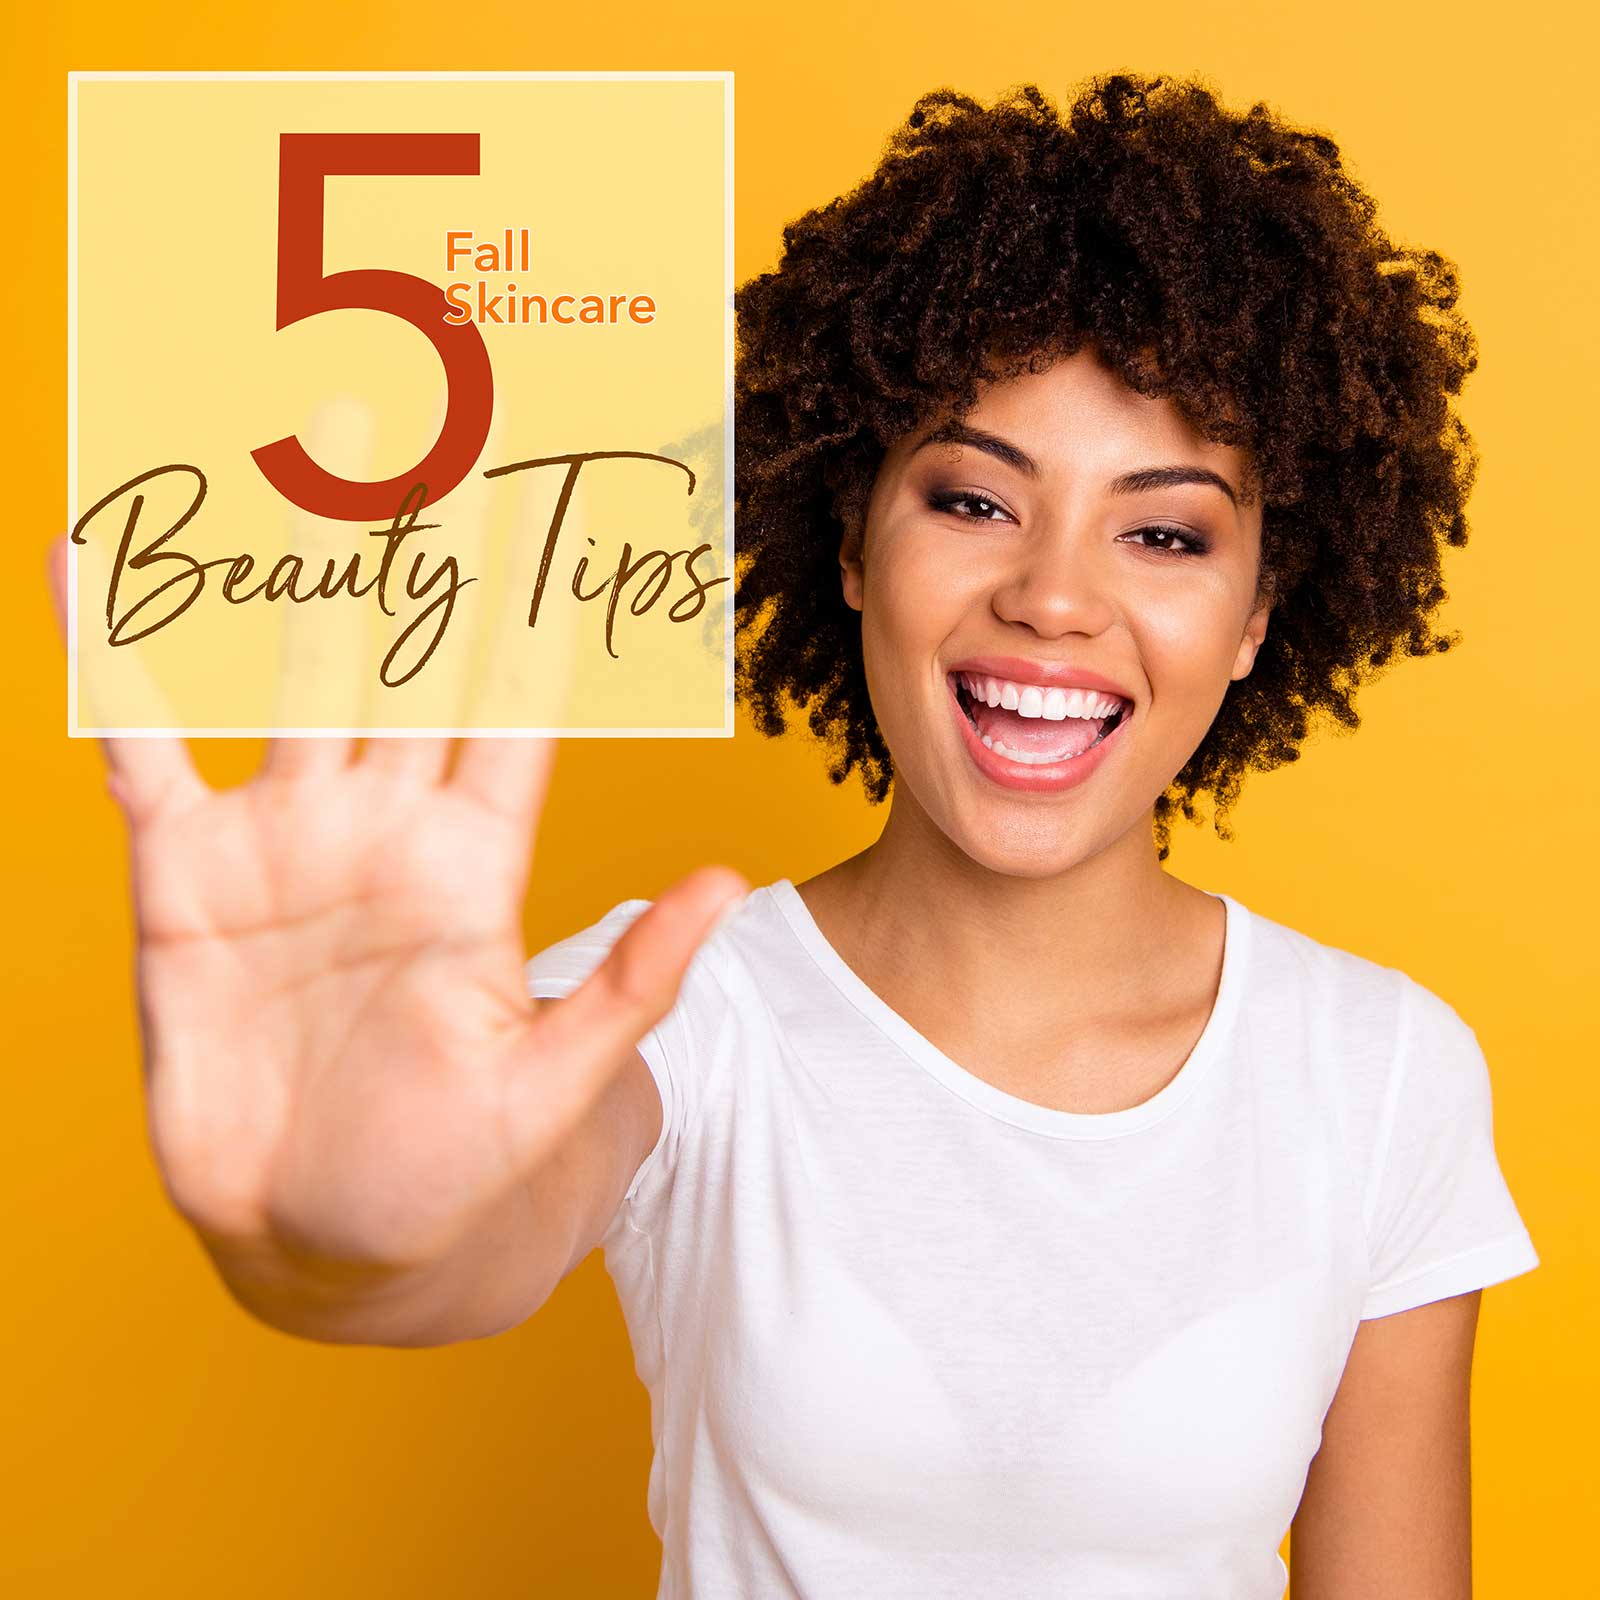 5 Beauty Tips for Fall Skincare